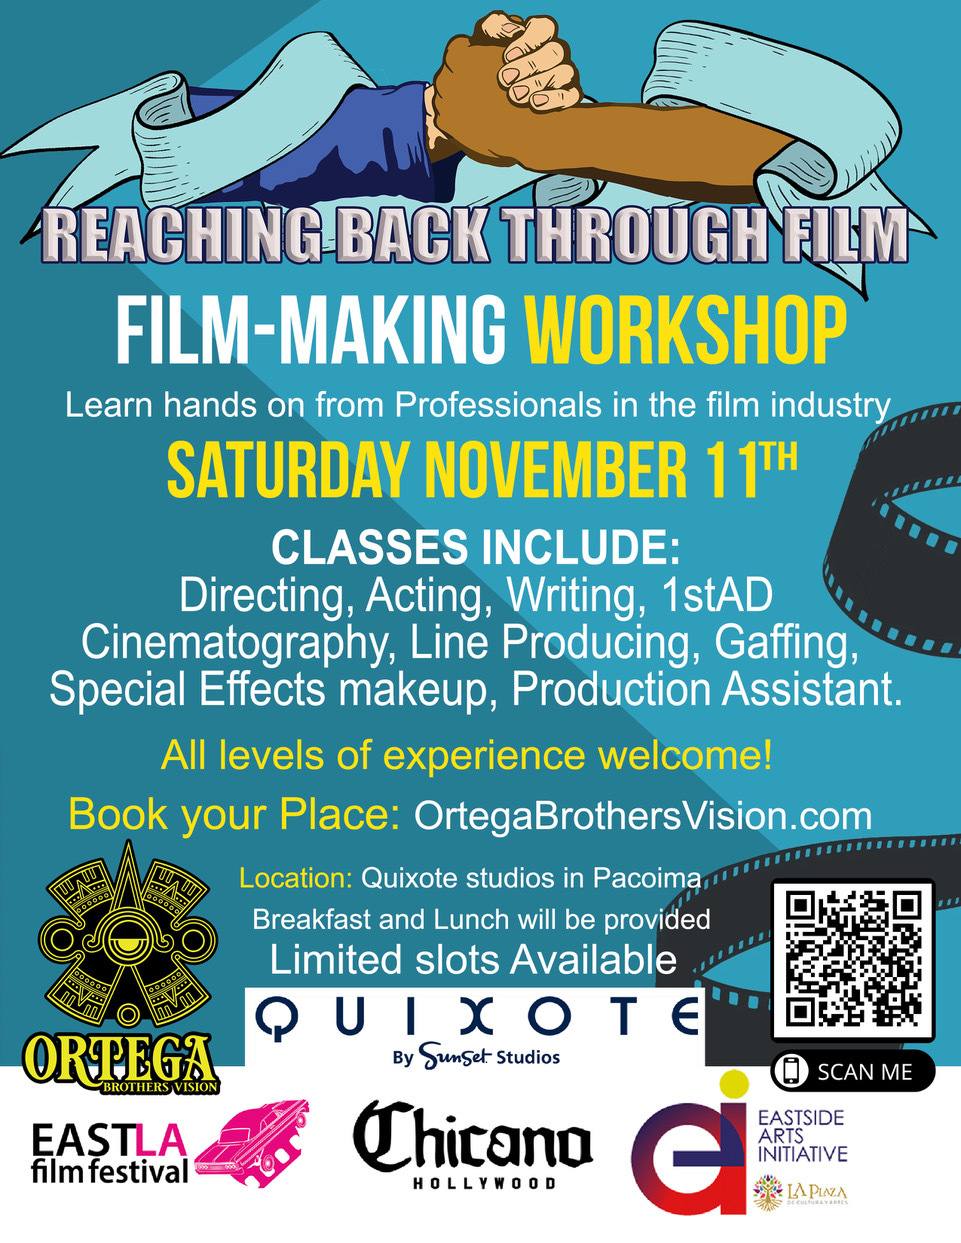 Saturday November 11 Free Filmmaking class. Classes include: Directing, Acting, Writing, 1stAD, Cinematography, Line Producing, Gaffin, Special Effects makeup, Production Assistant